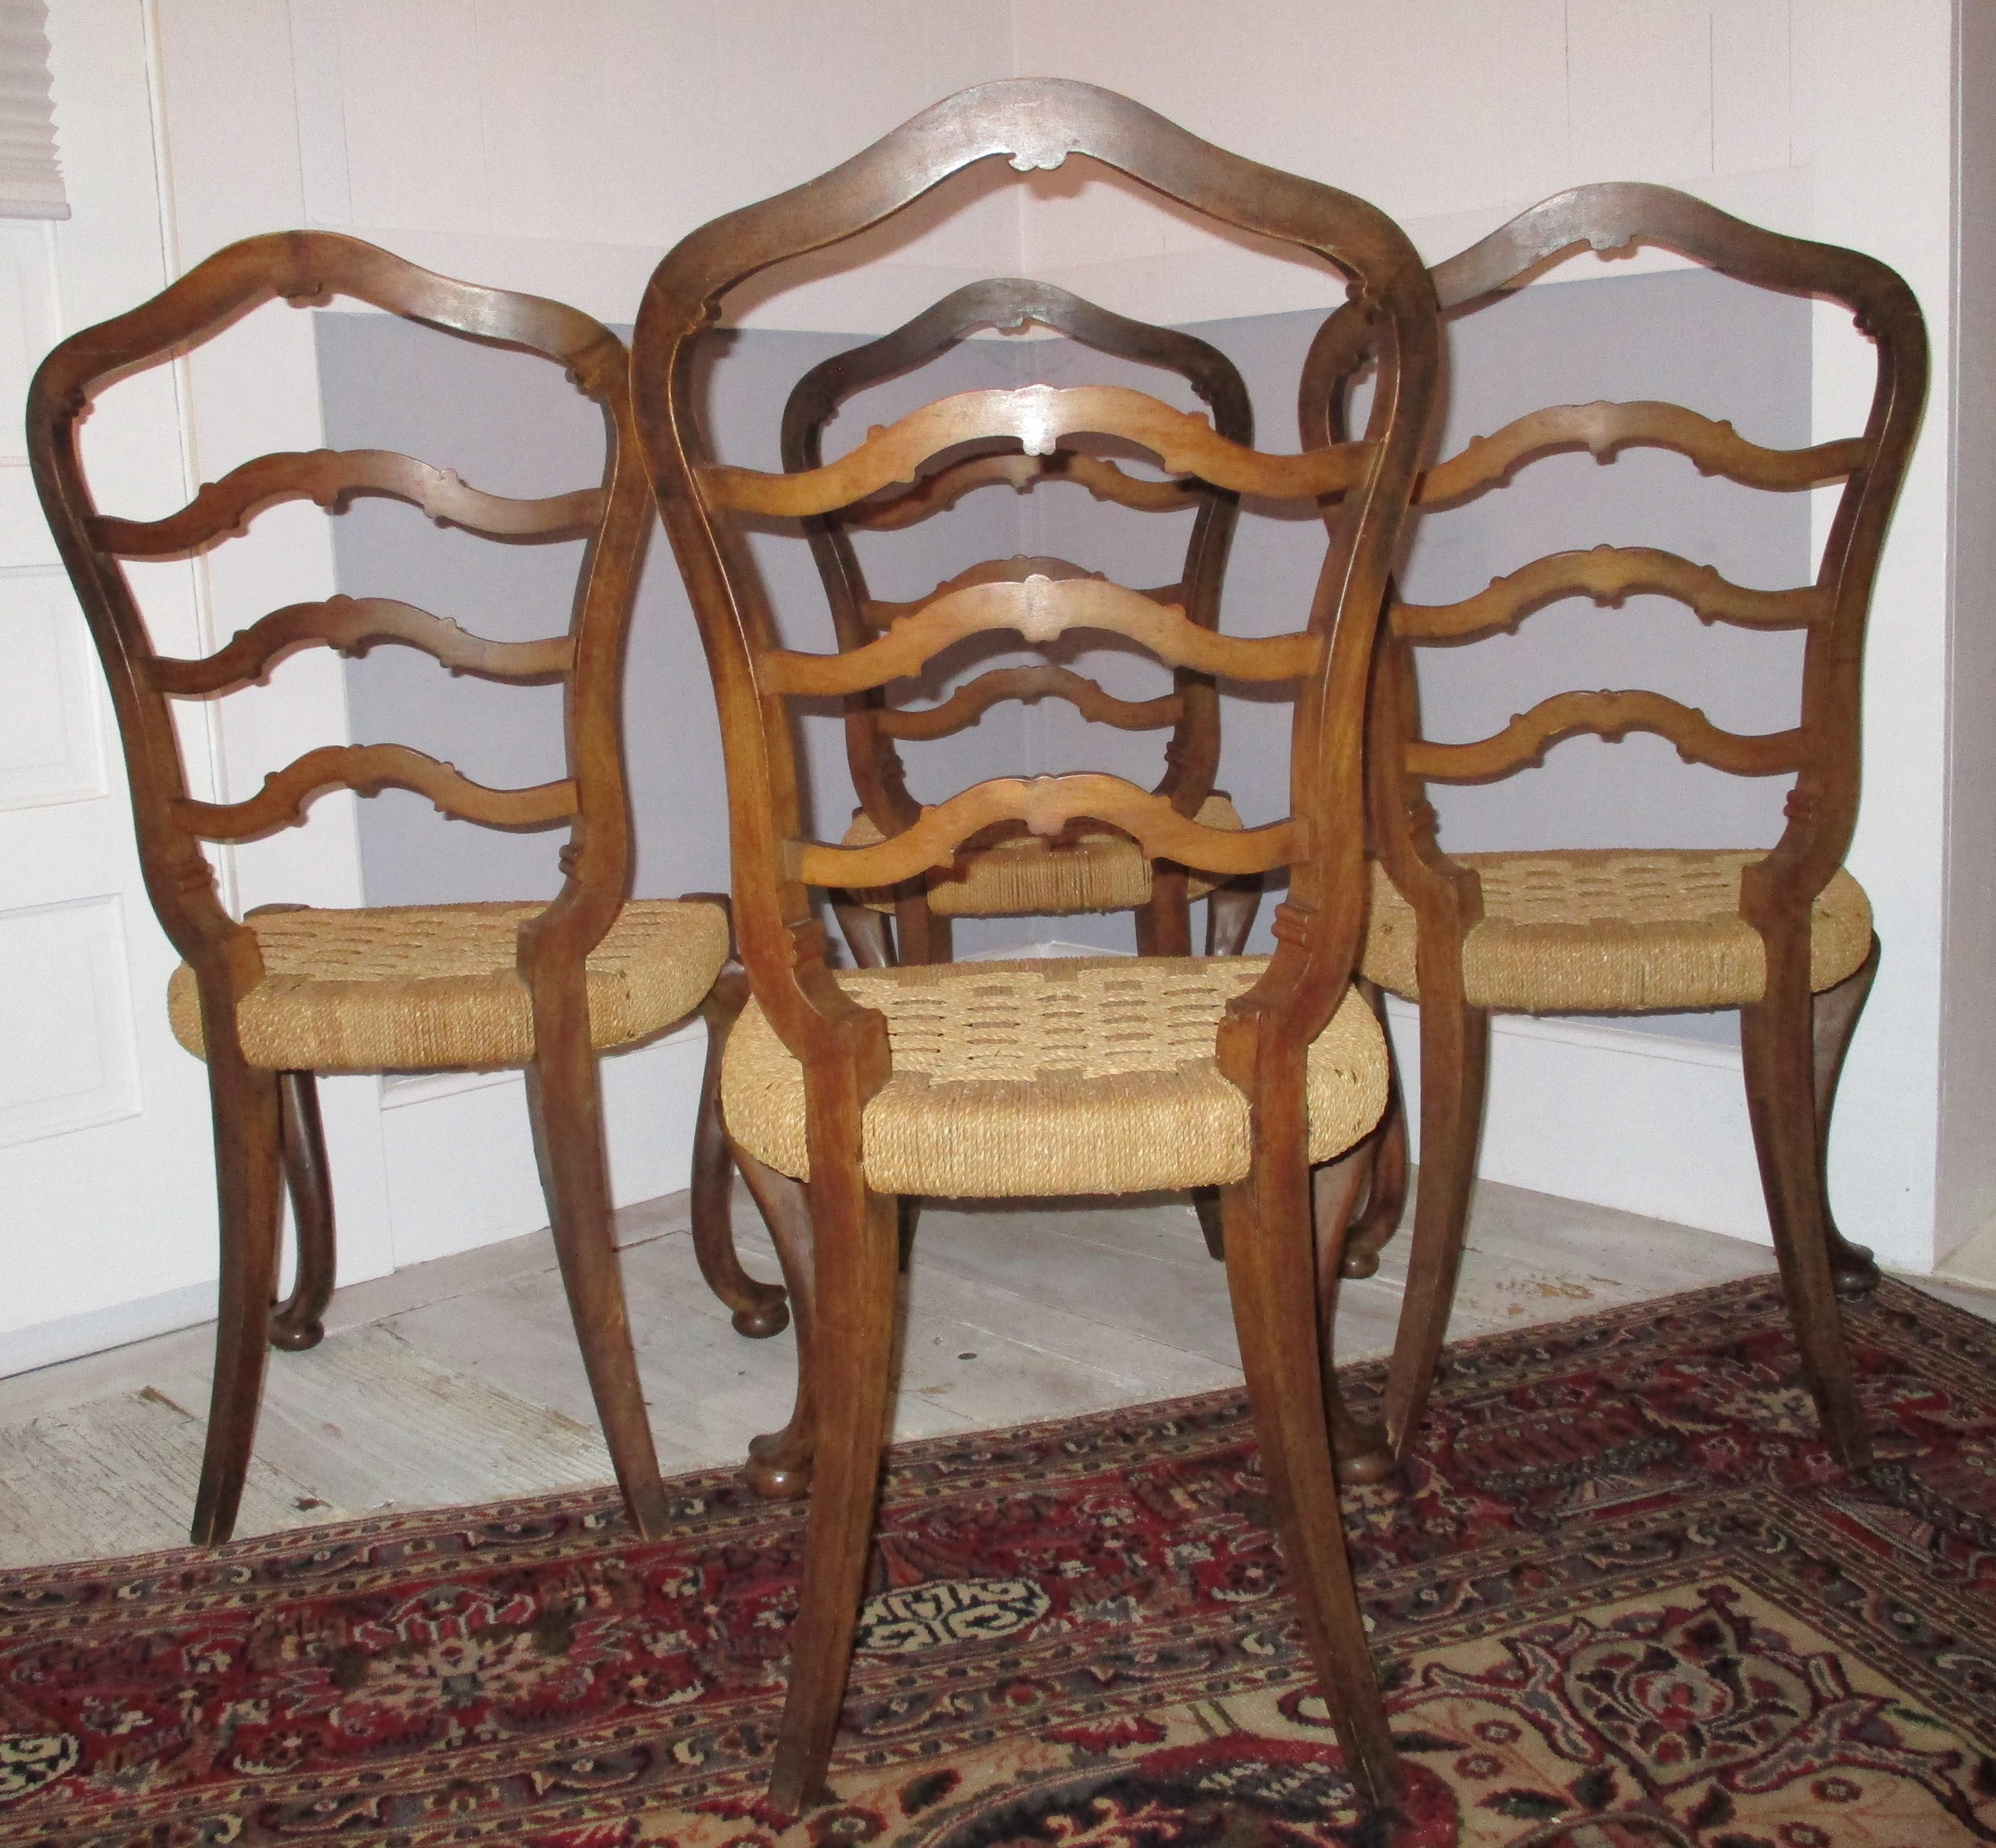 20th Century Italian Ladder Back, Cabriolet Leg Chairs with Hoof Feet and Rush Seats   For Sale